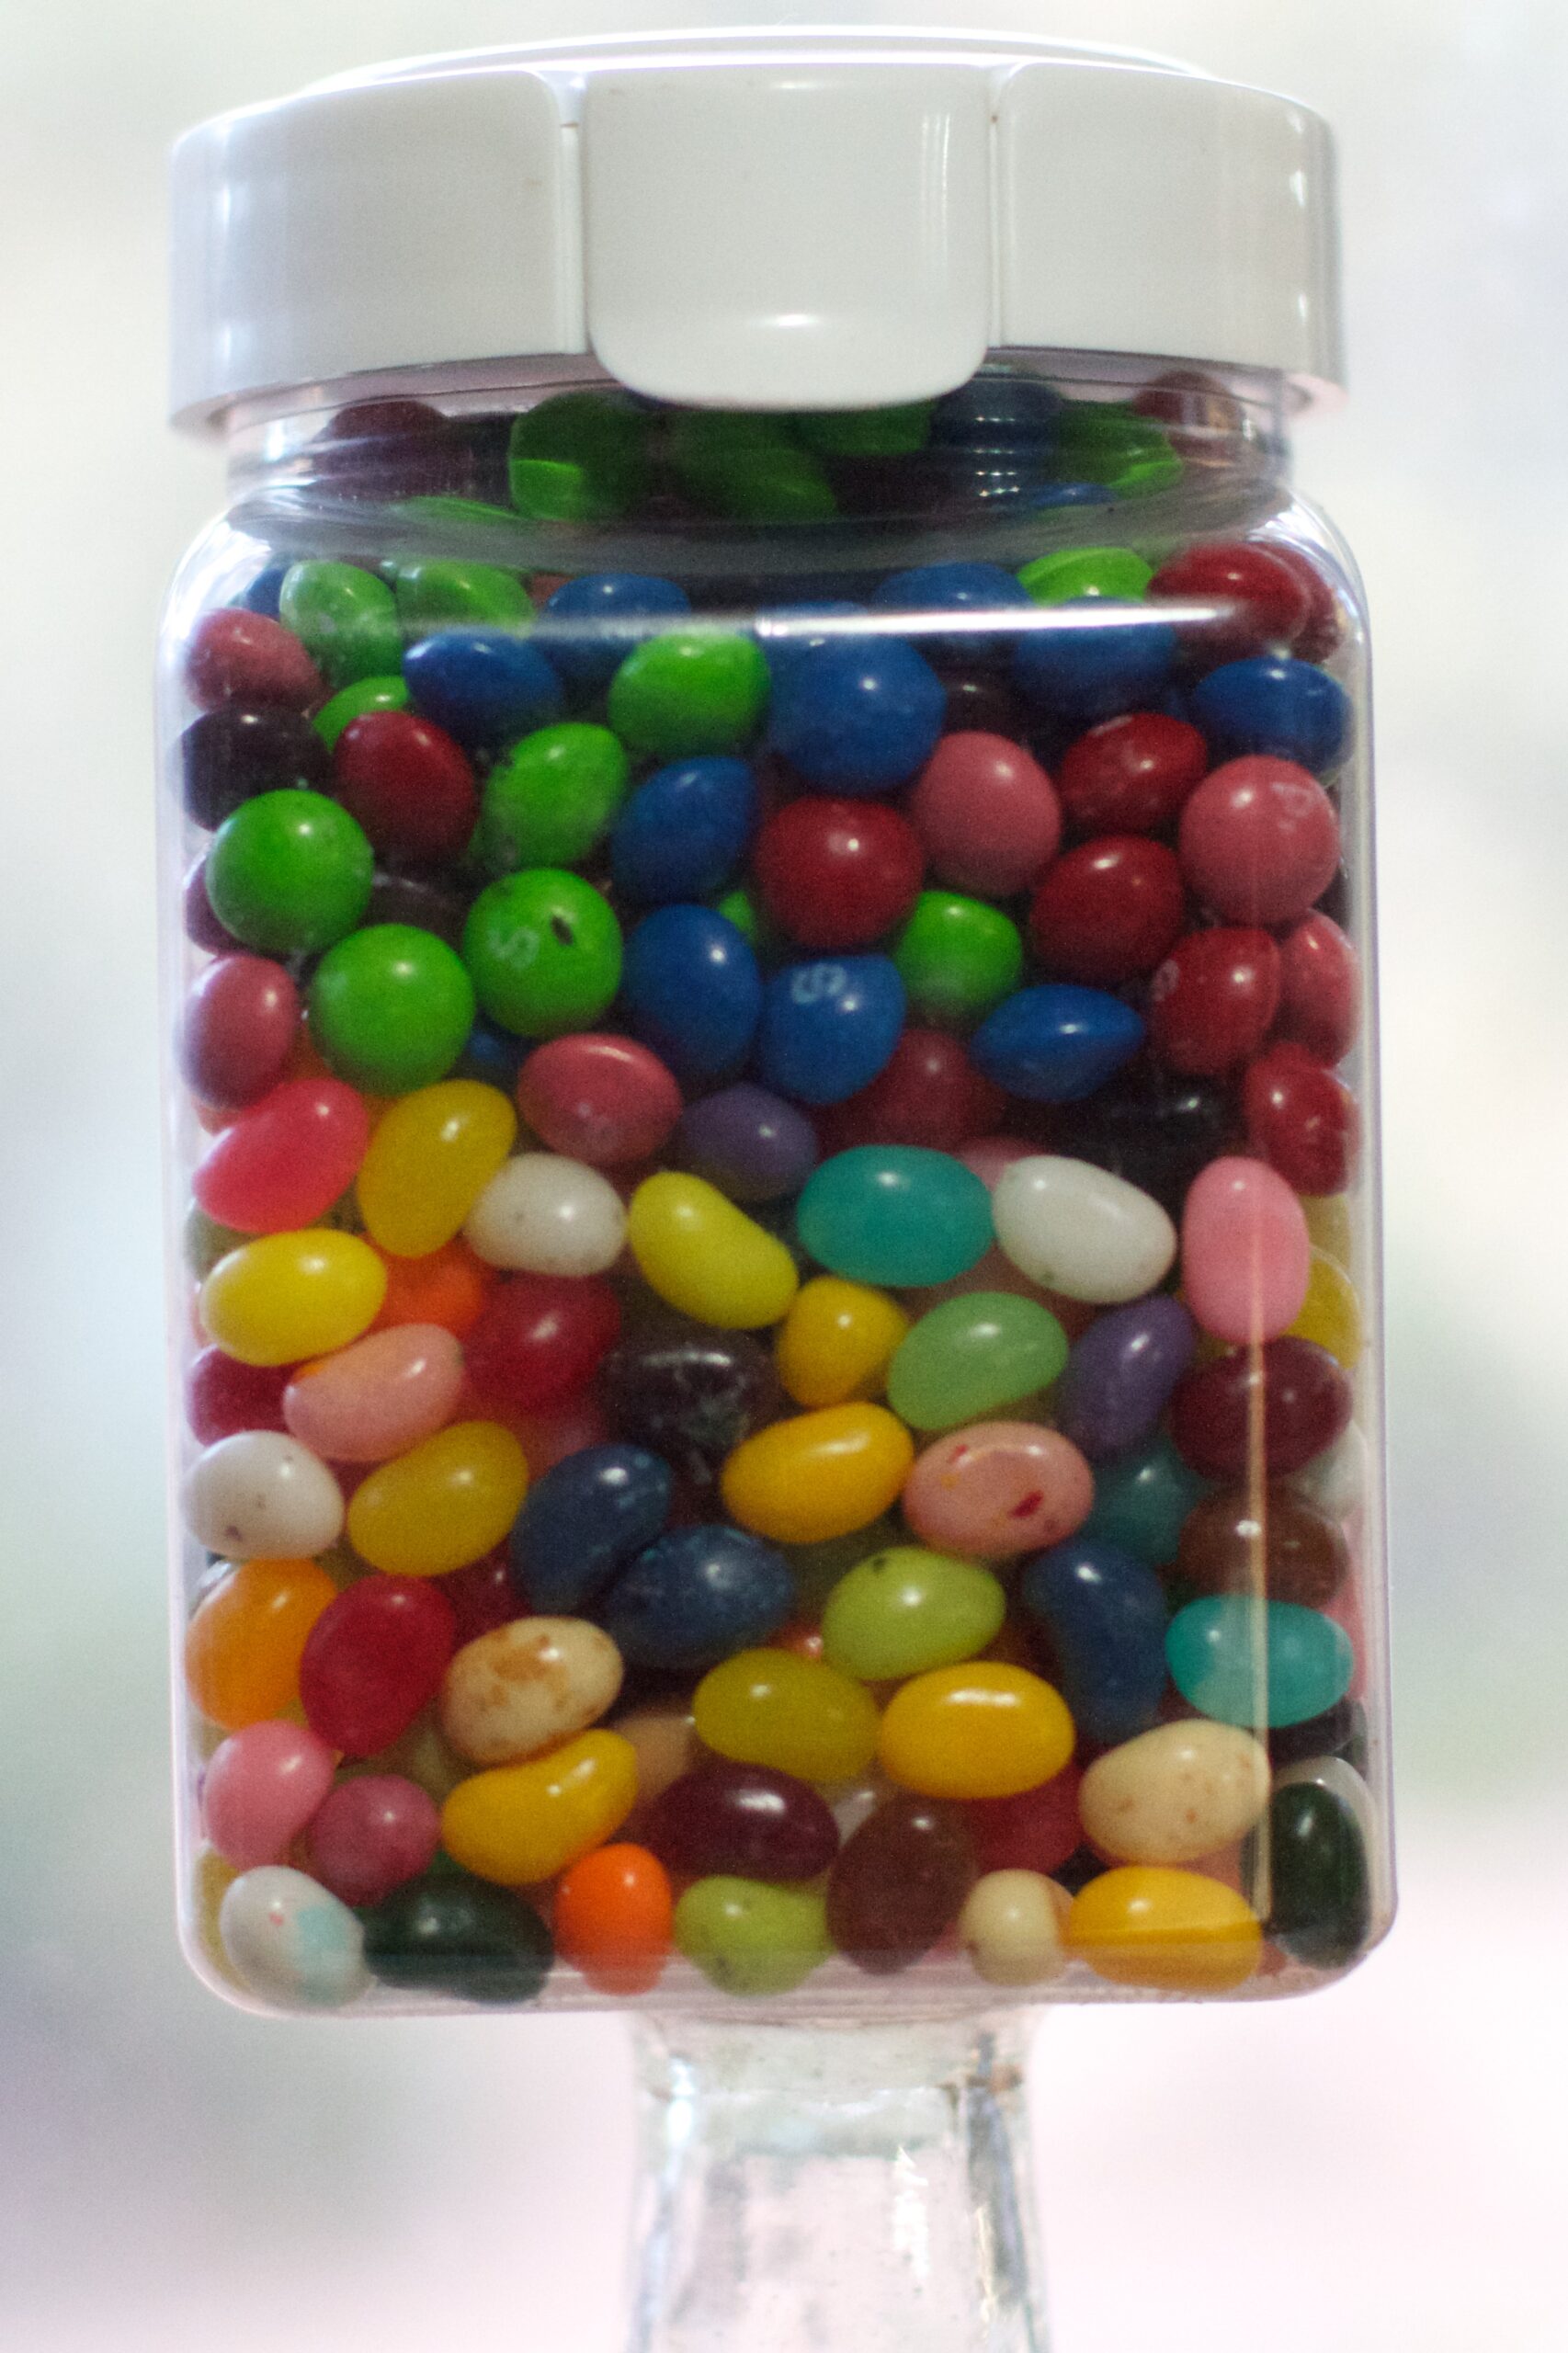 Jelly beans in a jar